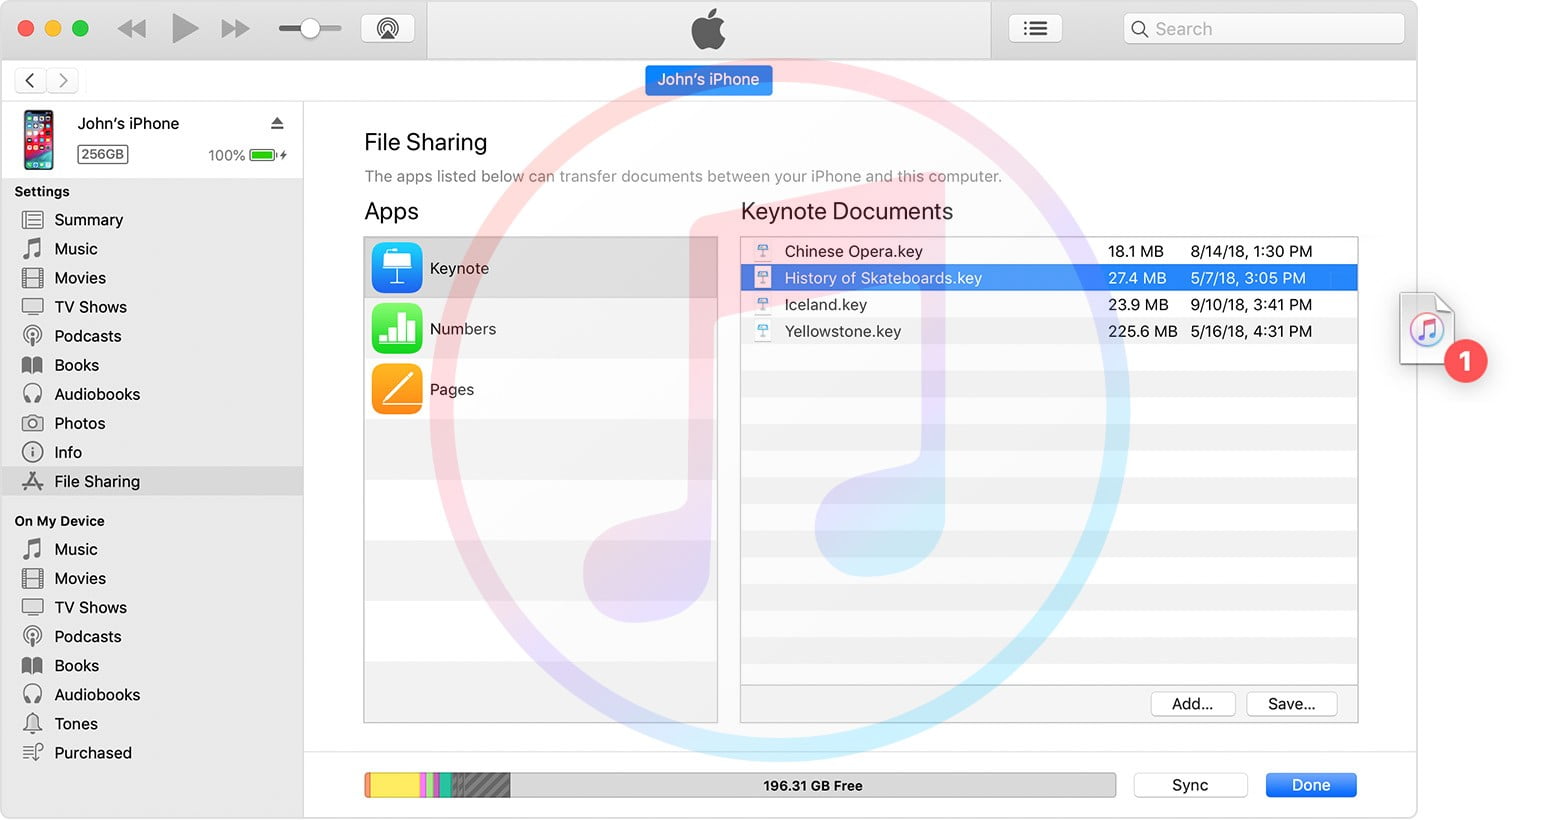 Share files from iPhone to Mac via iTunes File Sharing